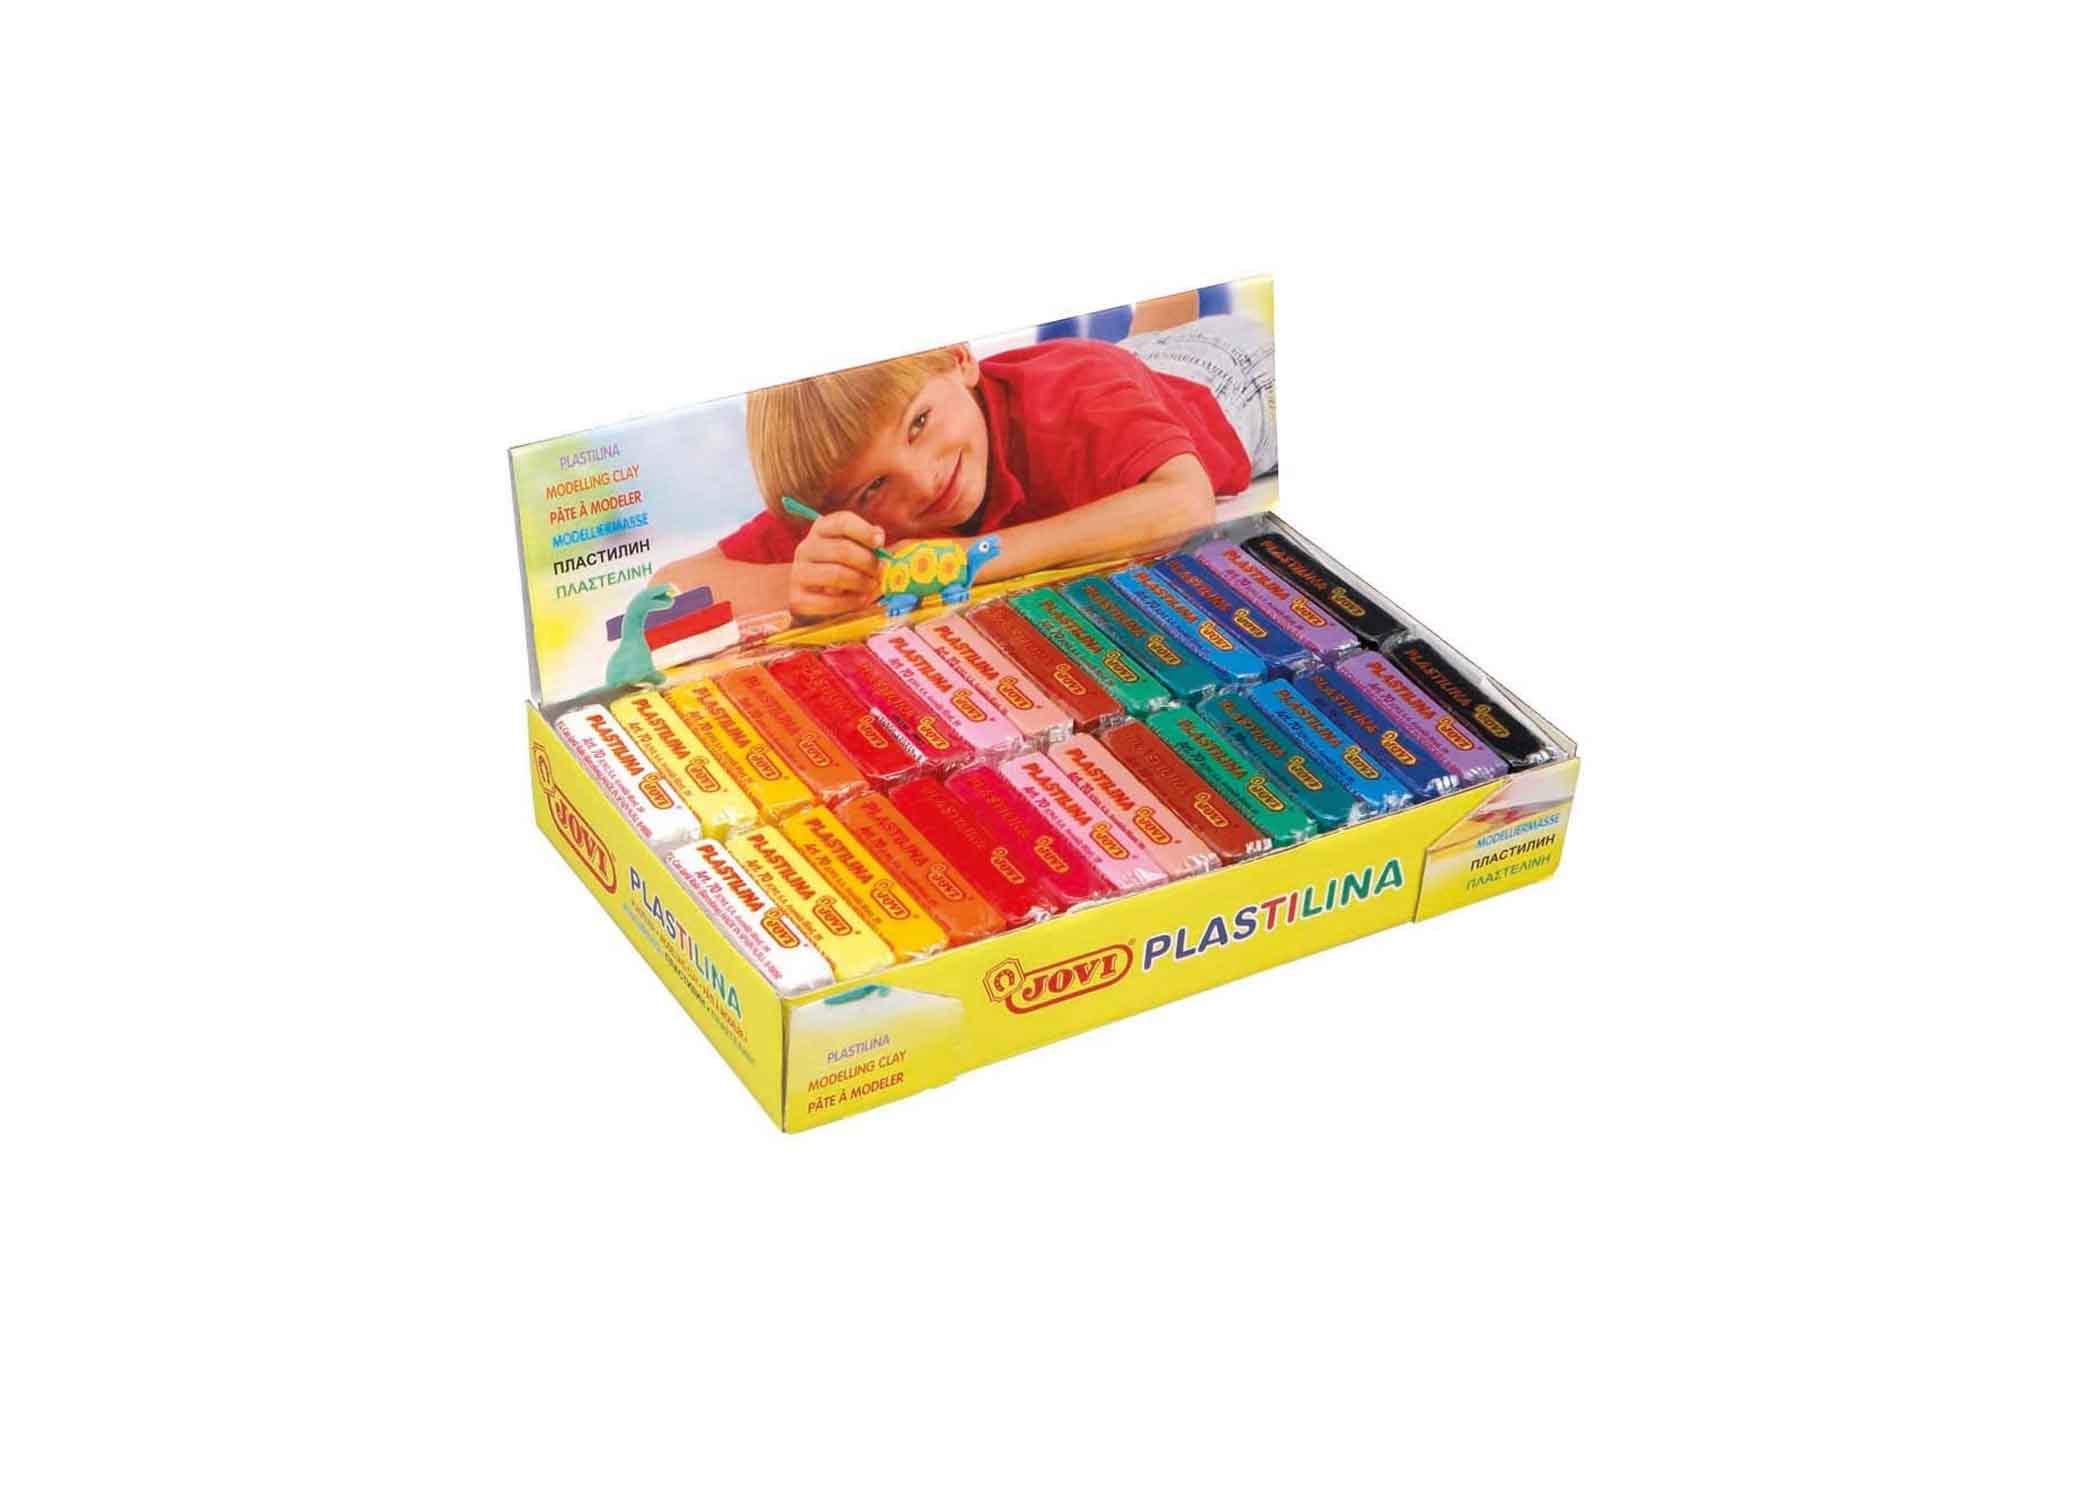 Crayola Non-Drying Modeling Clay 